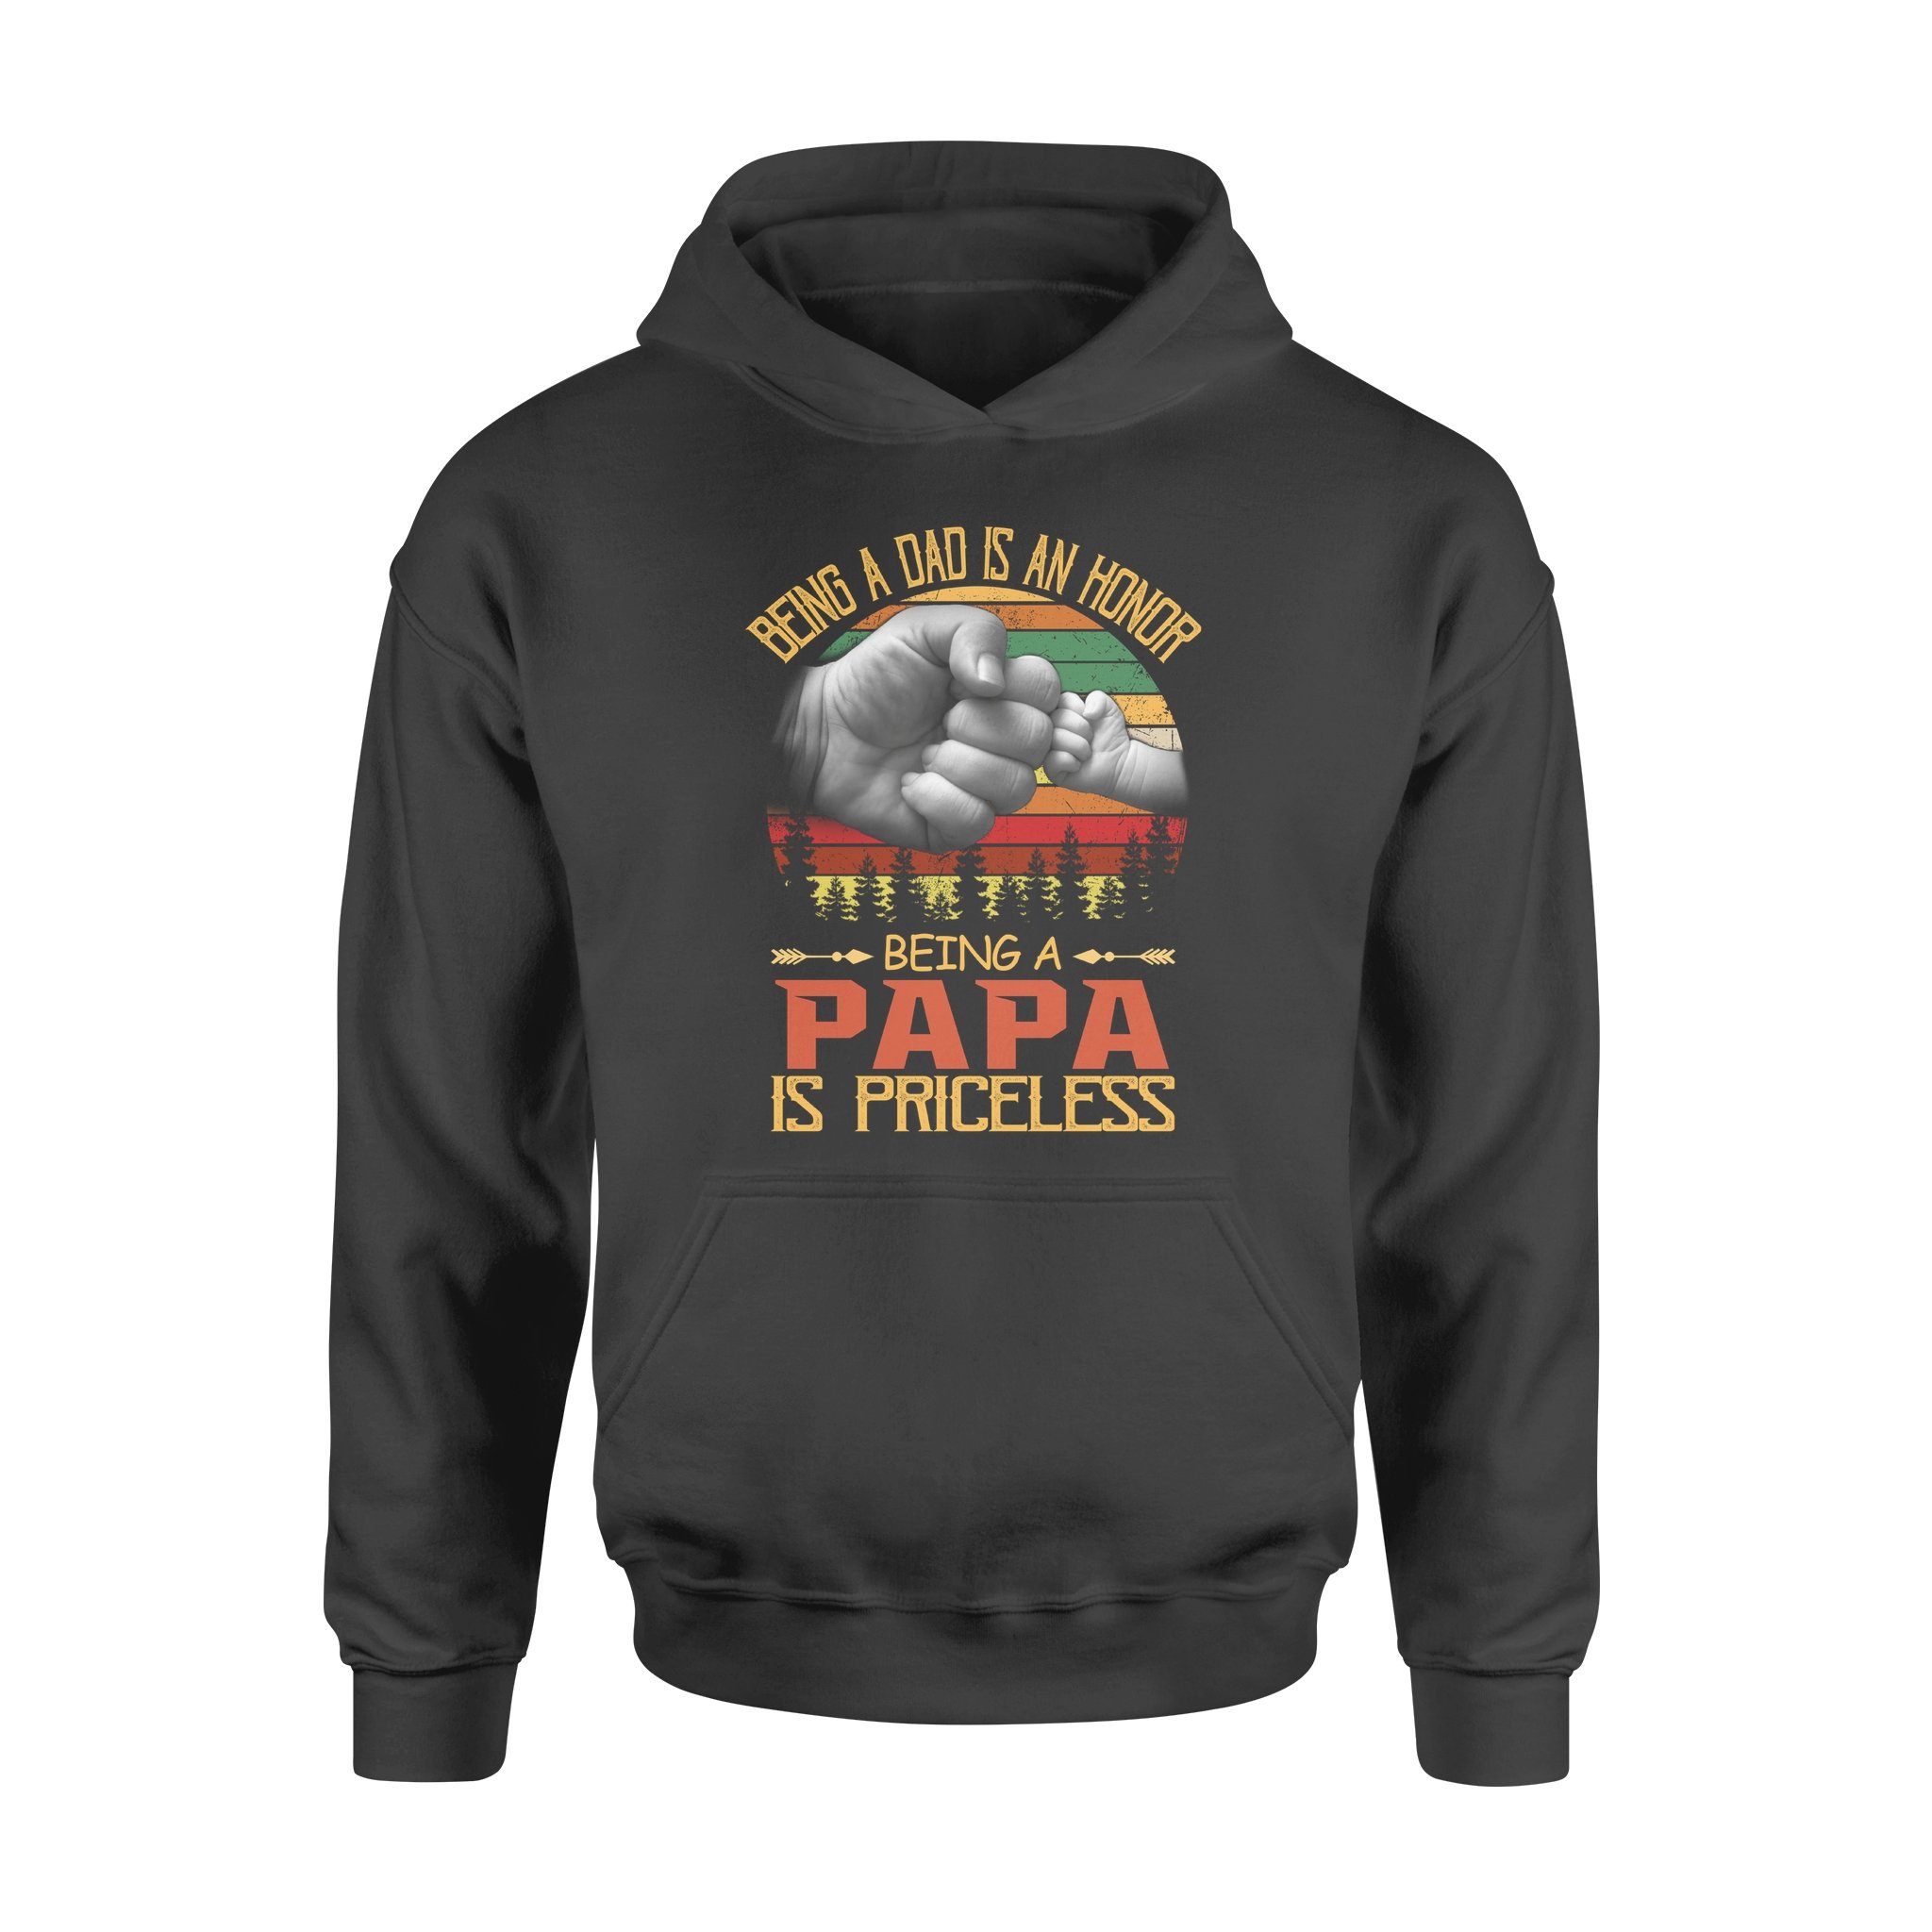 BEING A DAD IS AN HONOR BEING A PAPA IS PRICELESS , GIFTS FOR GRANDPA,GRANDPA SHIRT,GRANDPA GIFTS,FATHER?S DAY GIFT,PLUS SIZE SHIRT